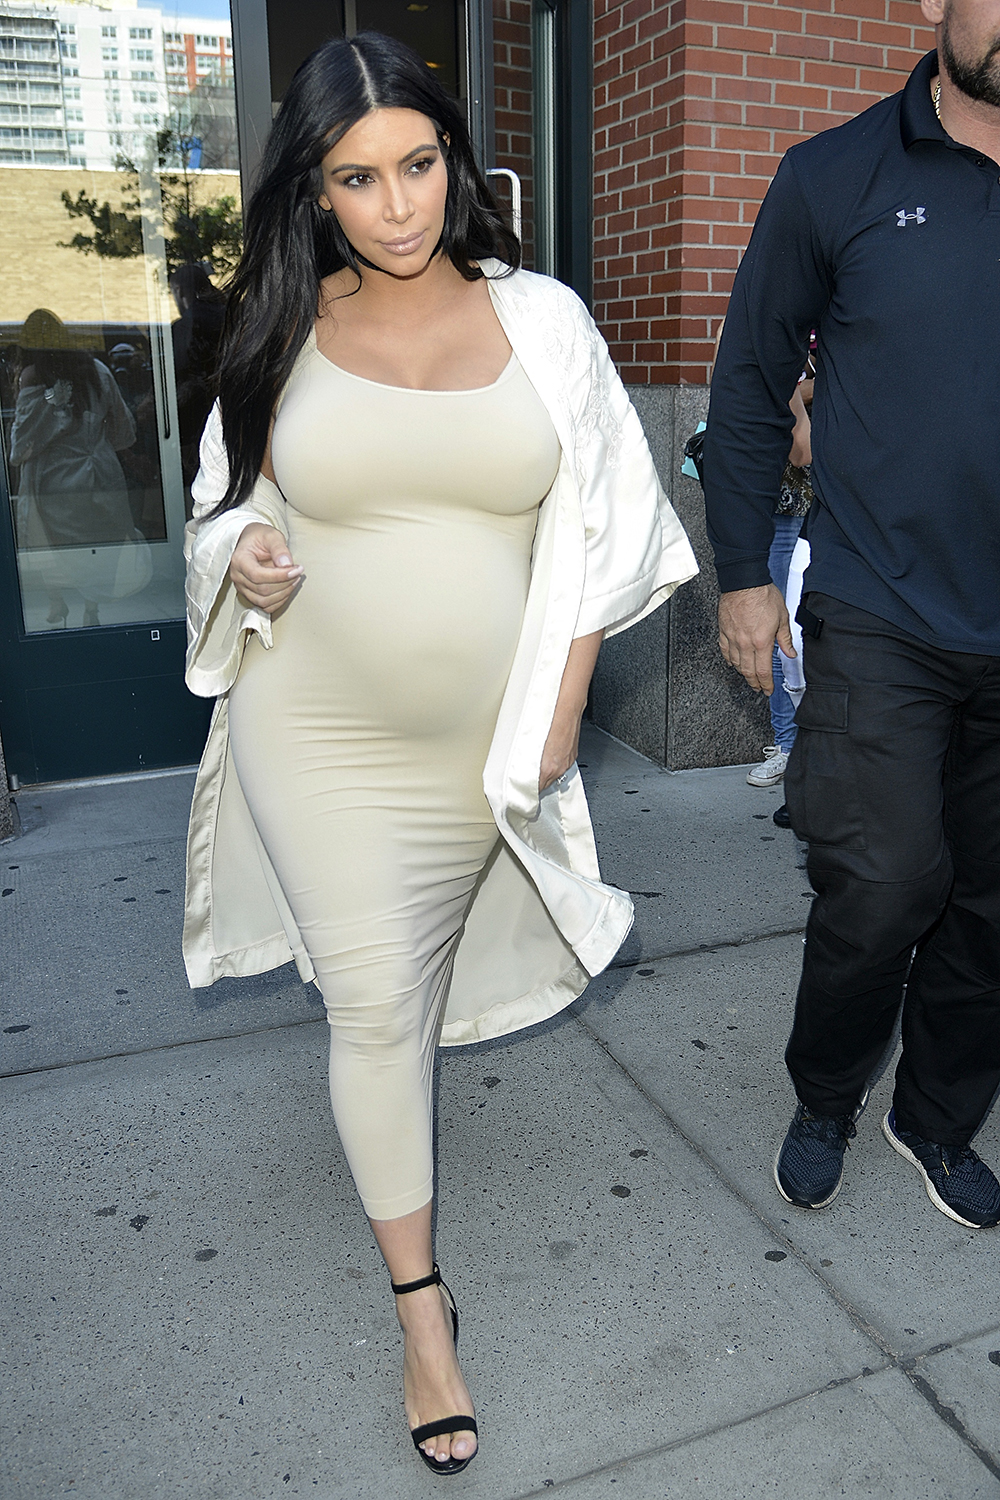 SEPTEMBER 13, 2015: Kim takes a break from black and switches back to creams, nudes and white. Photo / Getty Images